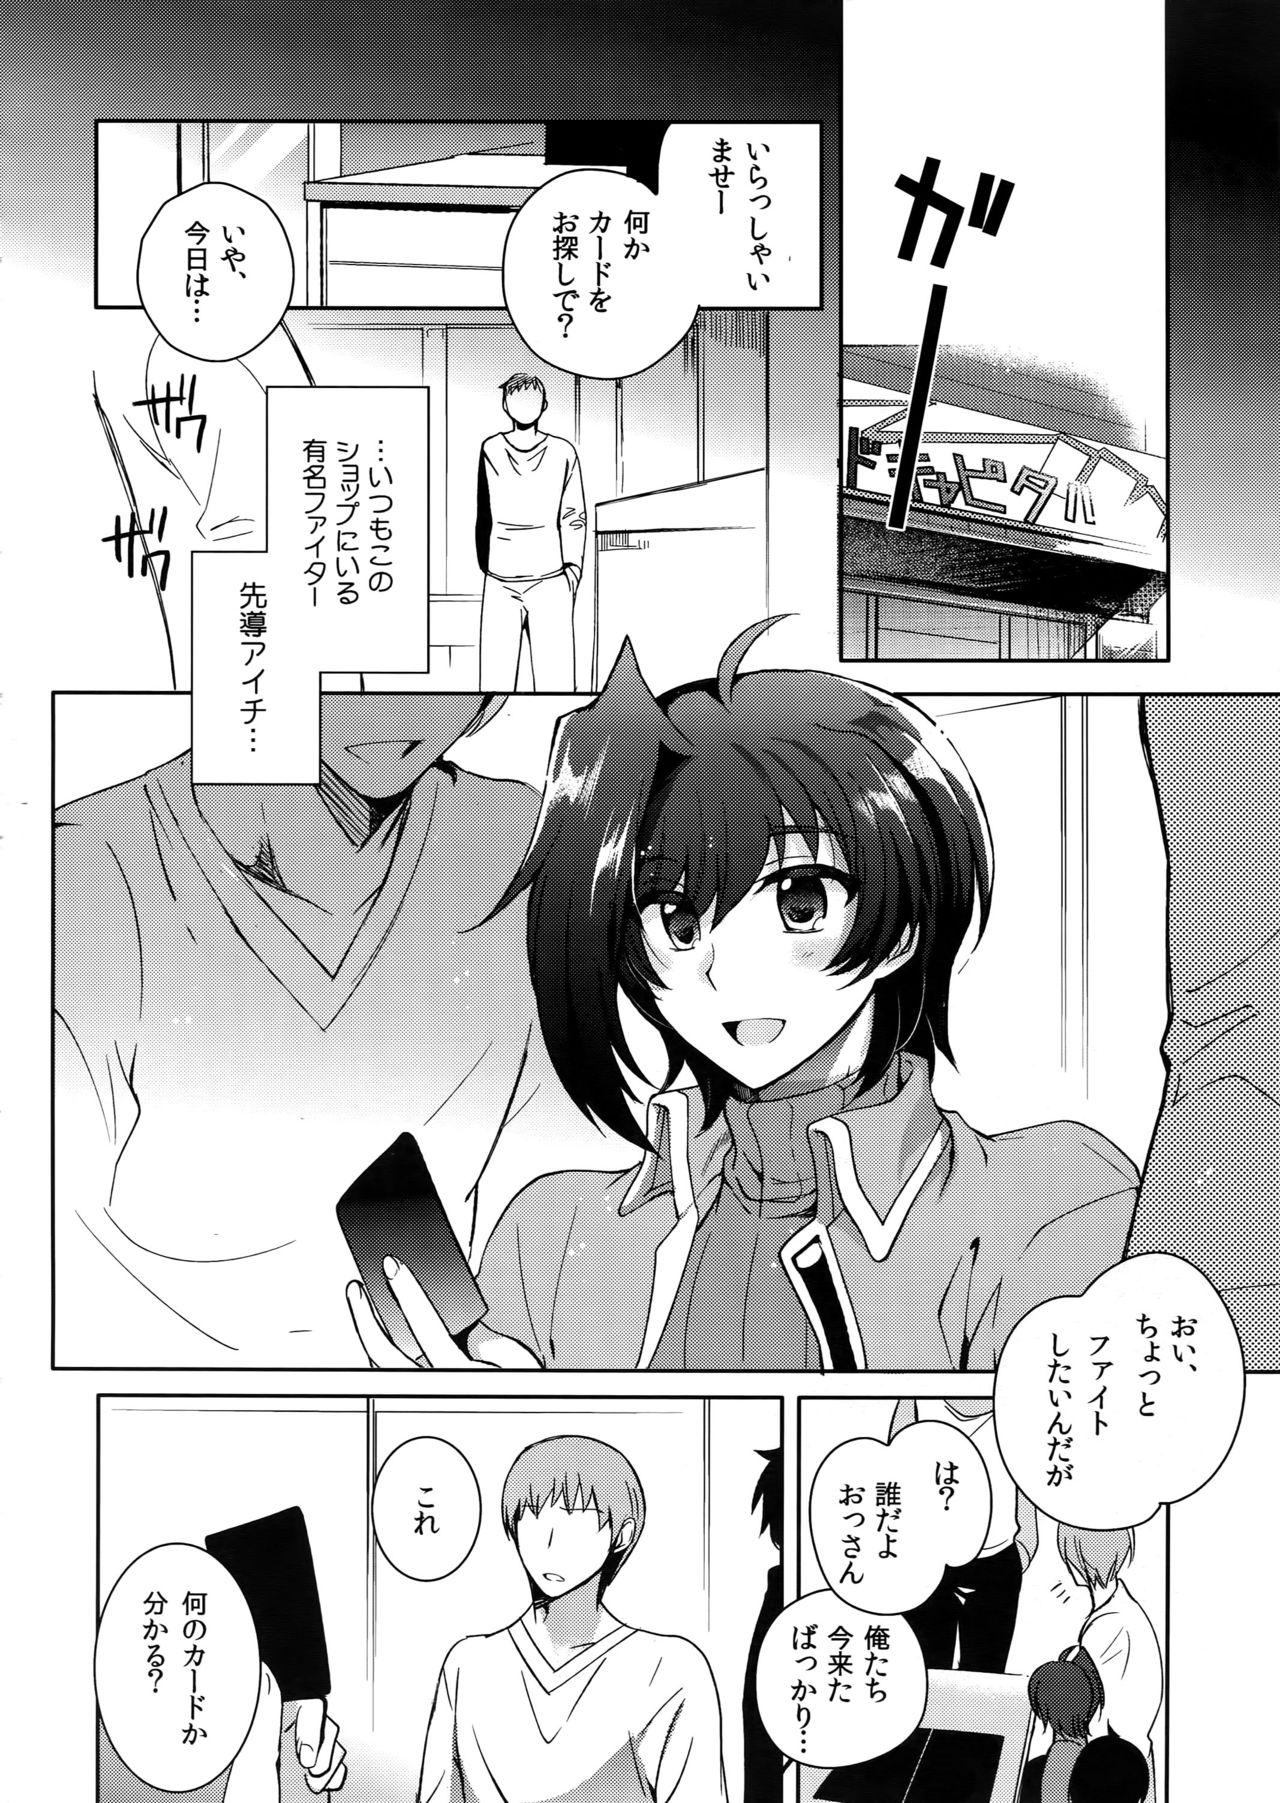 Jeans Aichizm - Cardfight vanguard Anal Play - Page 5